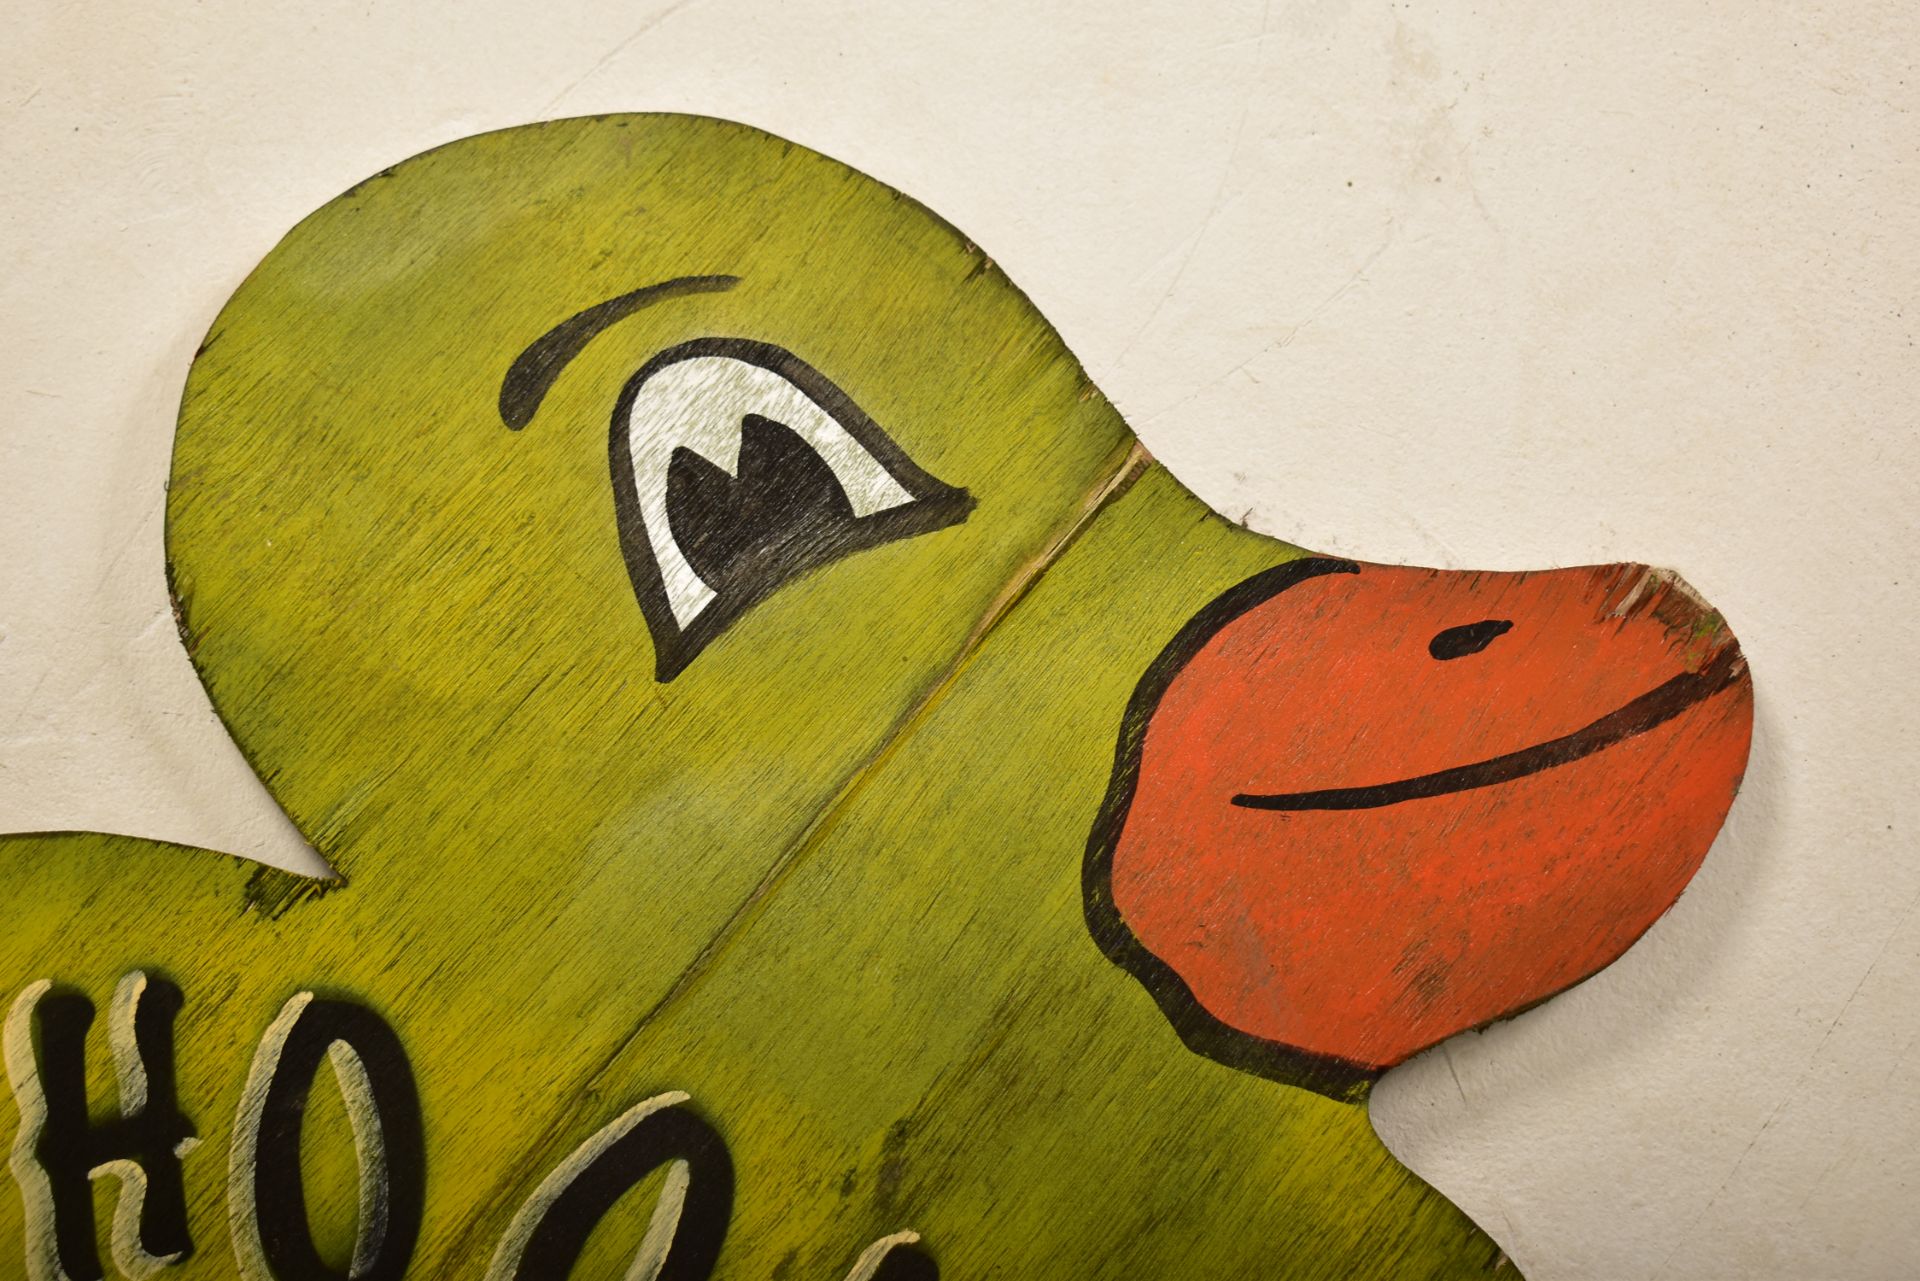 HOOK A DUCK - VINTAGE 20TH CENTURY FAIRGROUND SIGN - Image 2 of 3